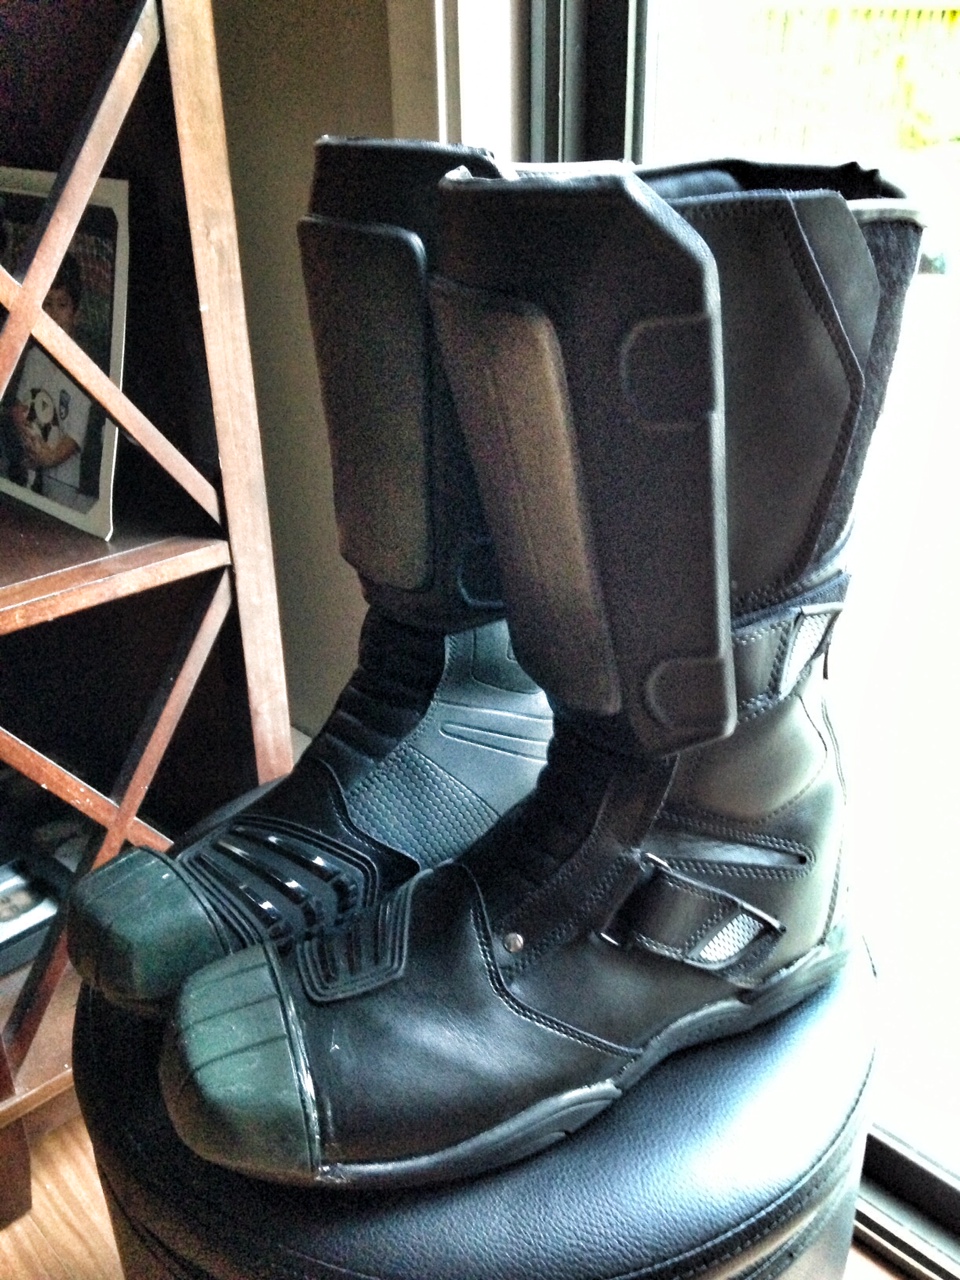 Boots "Close Enough" Close Enoughs (Yeah you read that right!) | RPF  Costume and Prop Maker Community